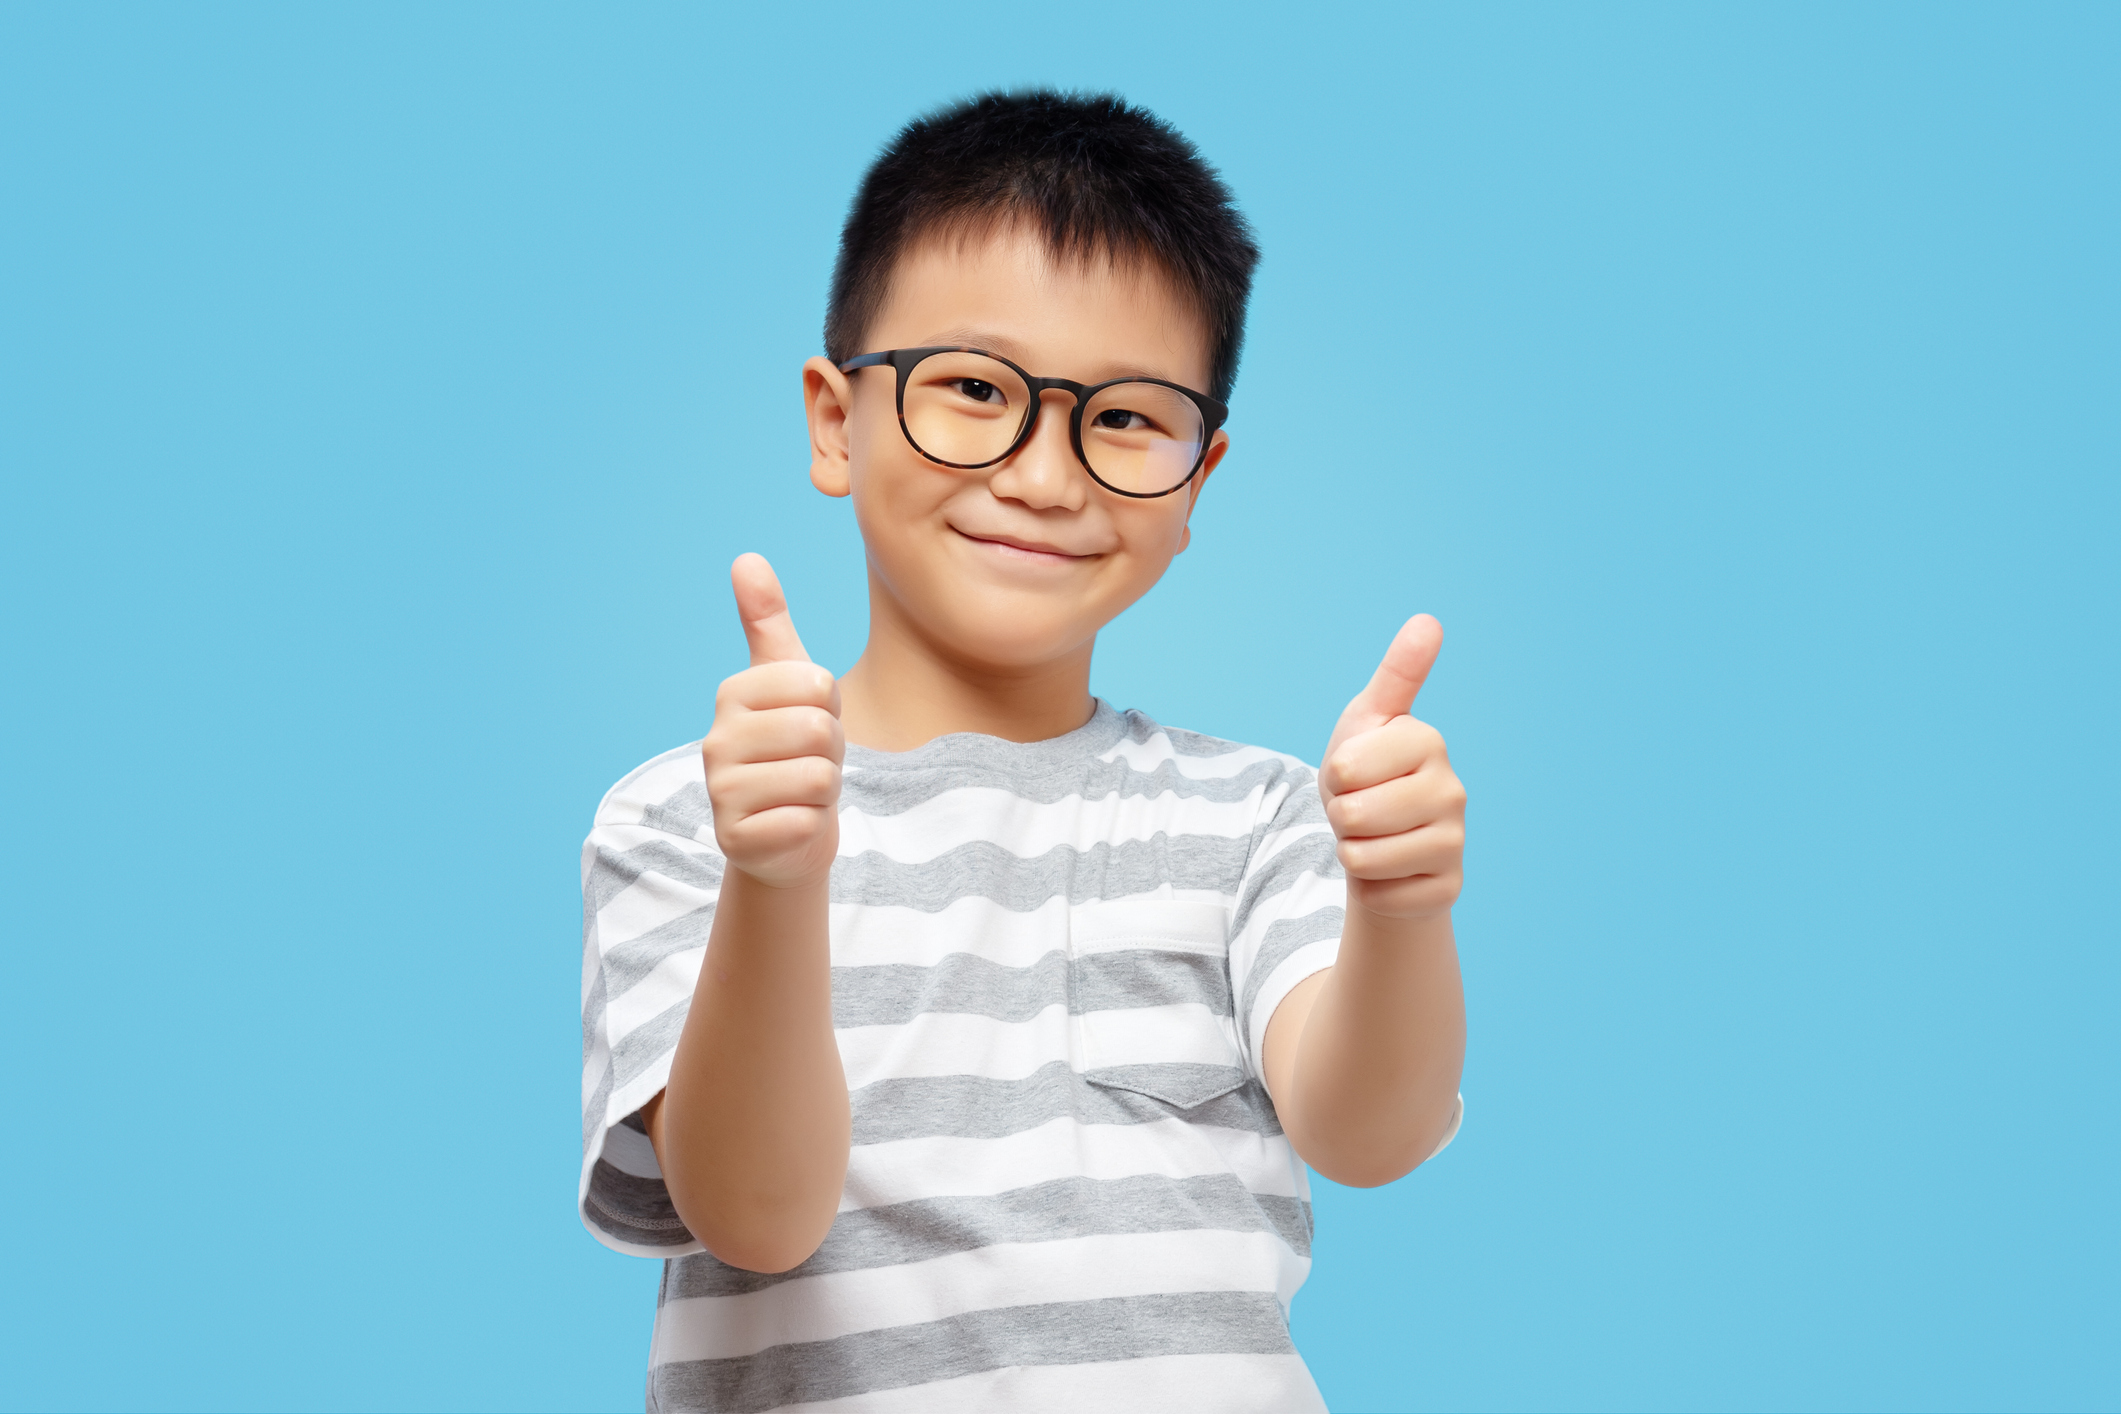 Happy kid showing thumbs up, wearing eyeglasses on blue background